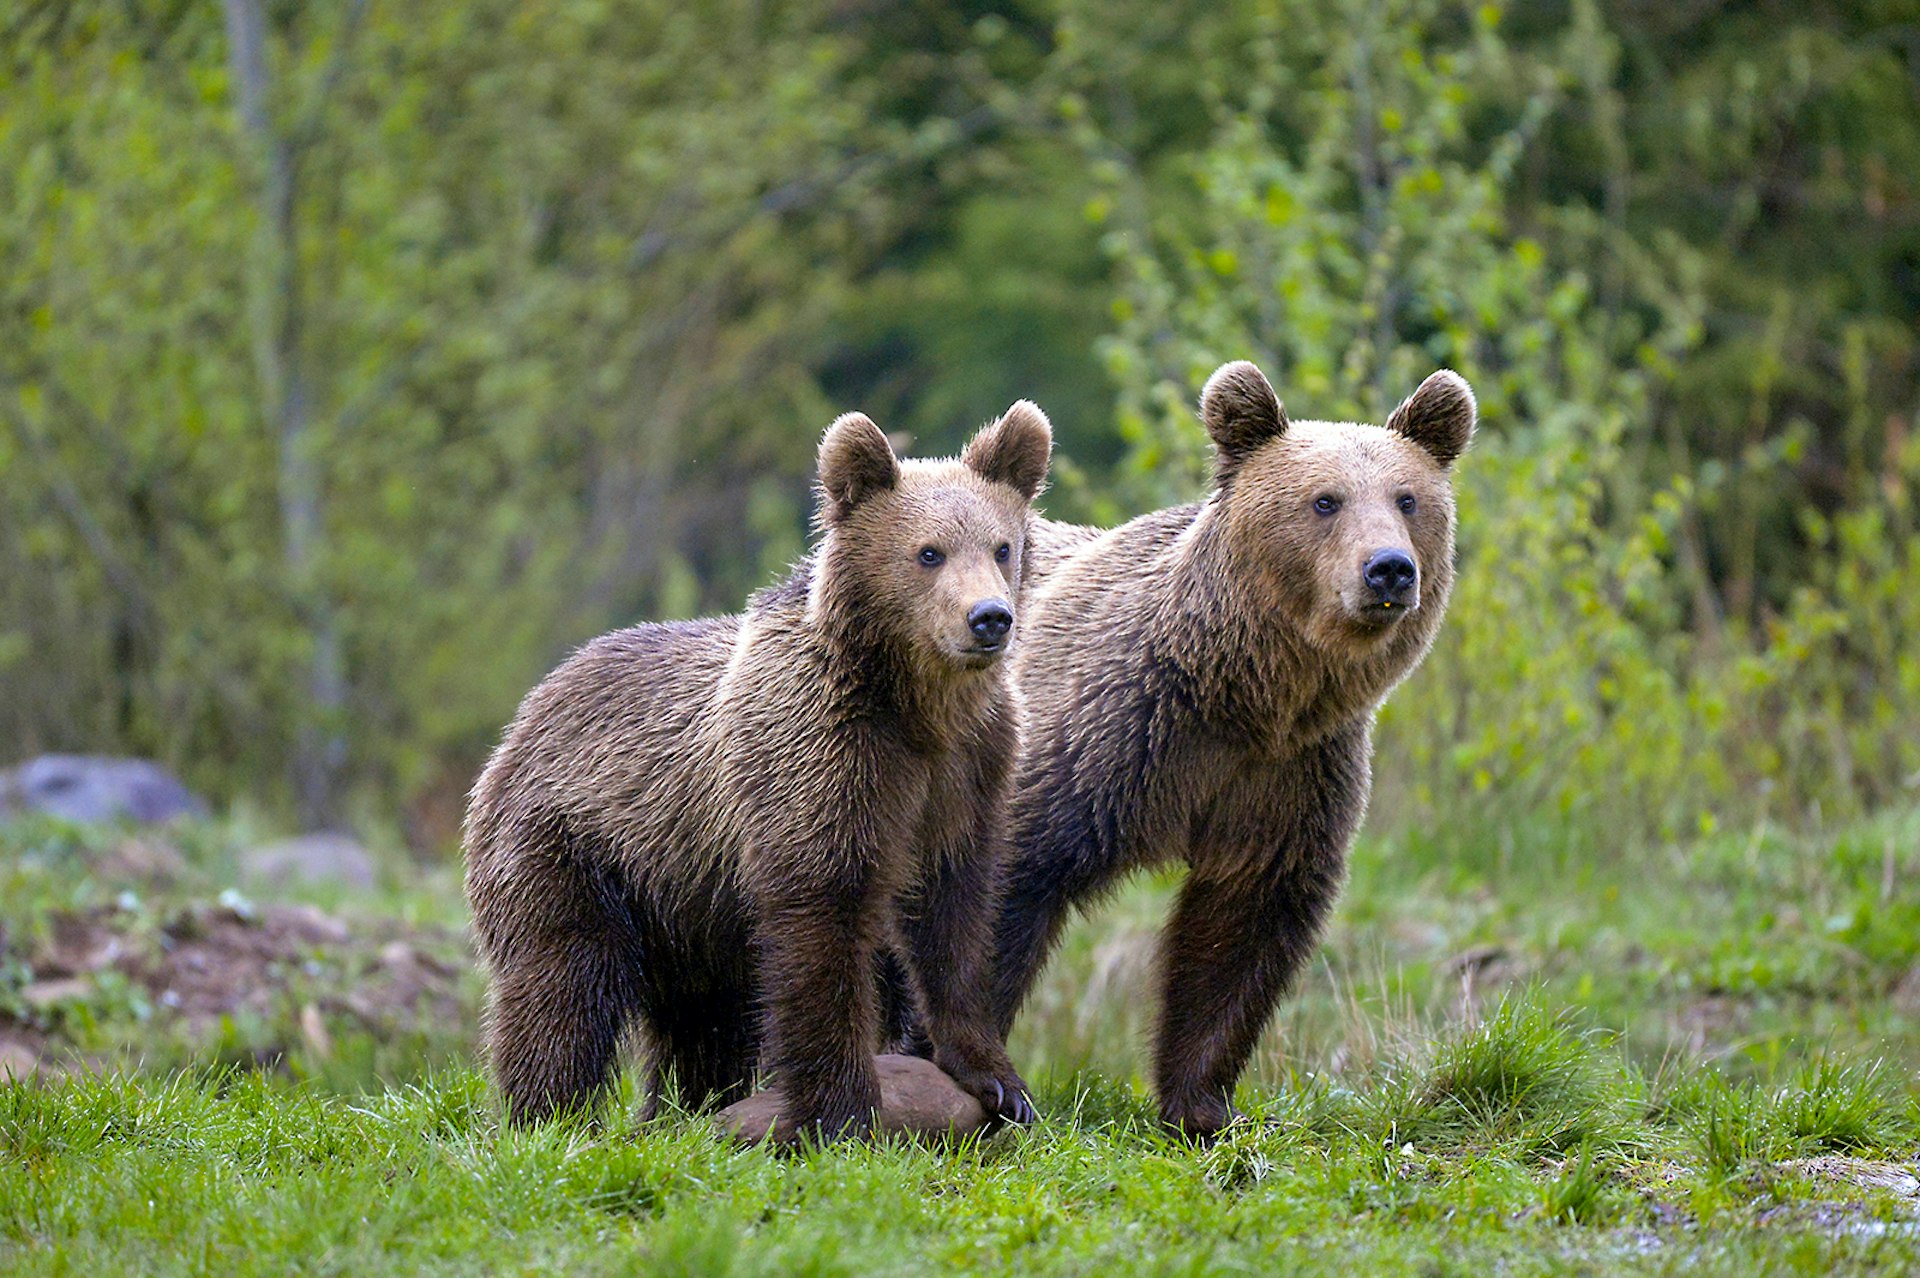 Two bears stand side by side in a forest clearing. Transylvania, Romania.